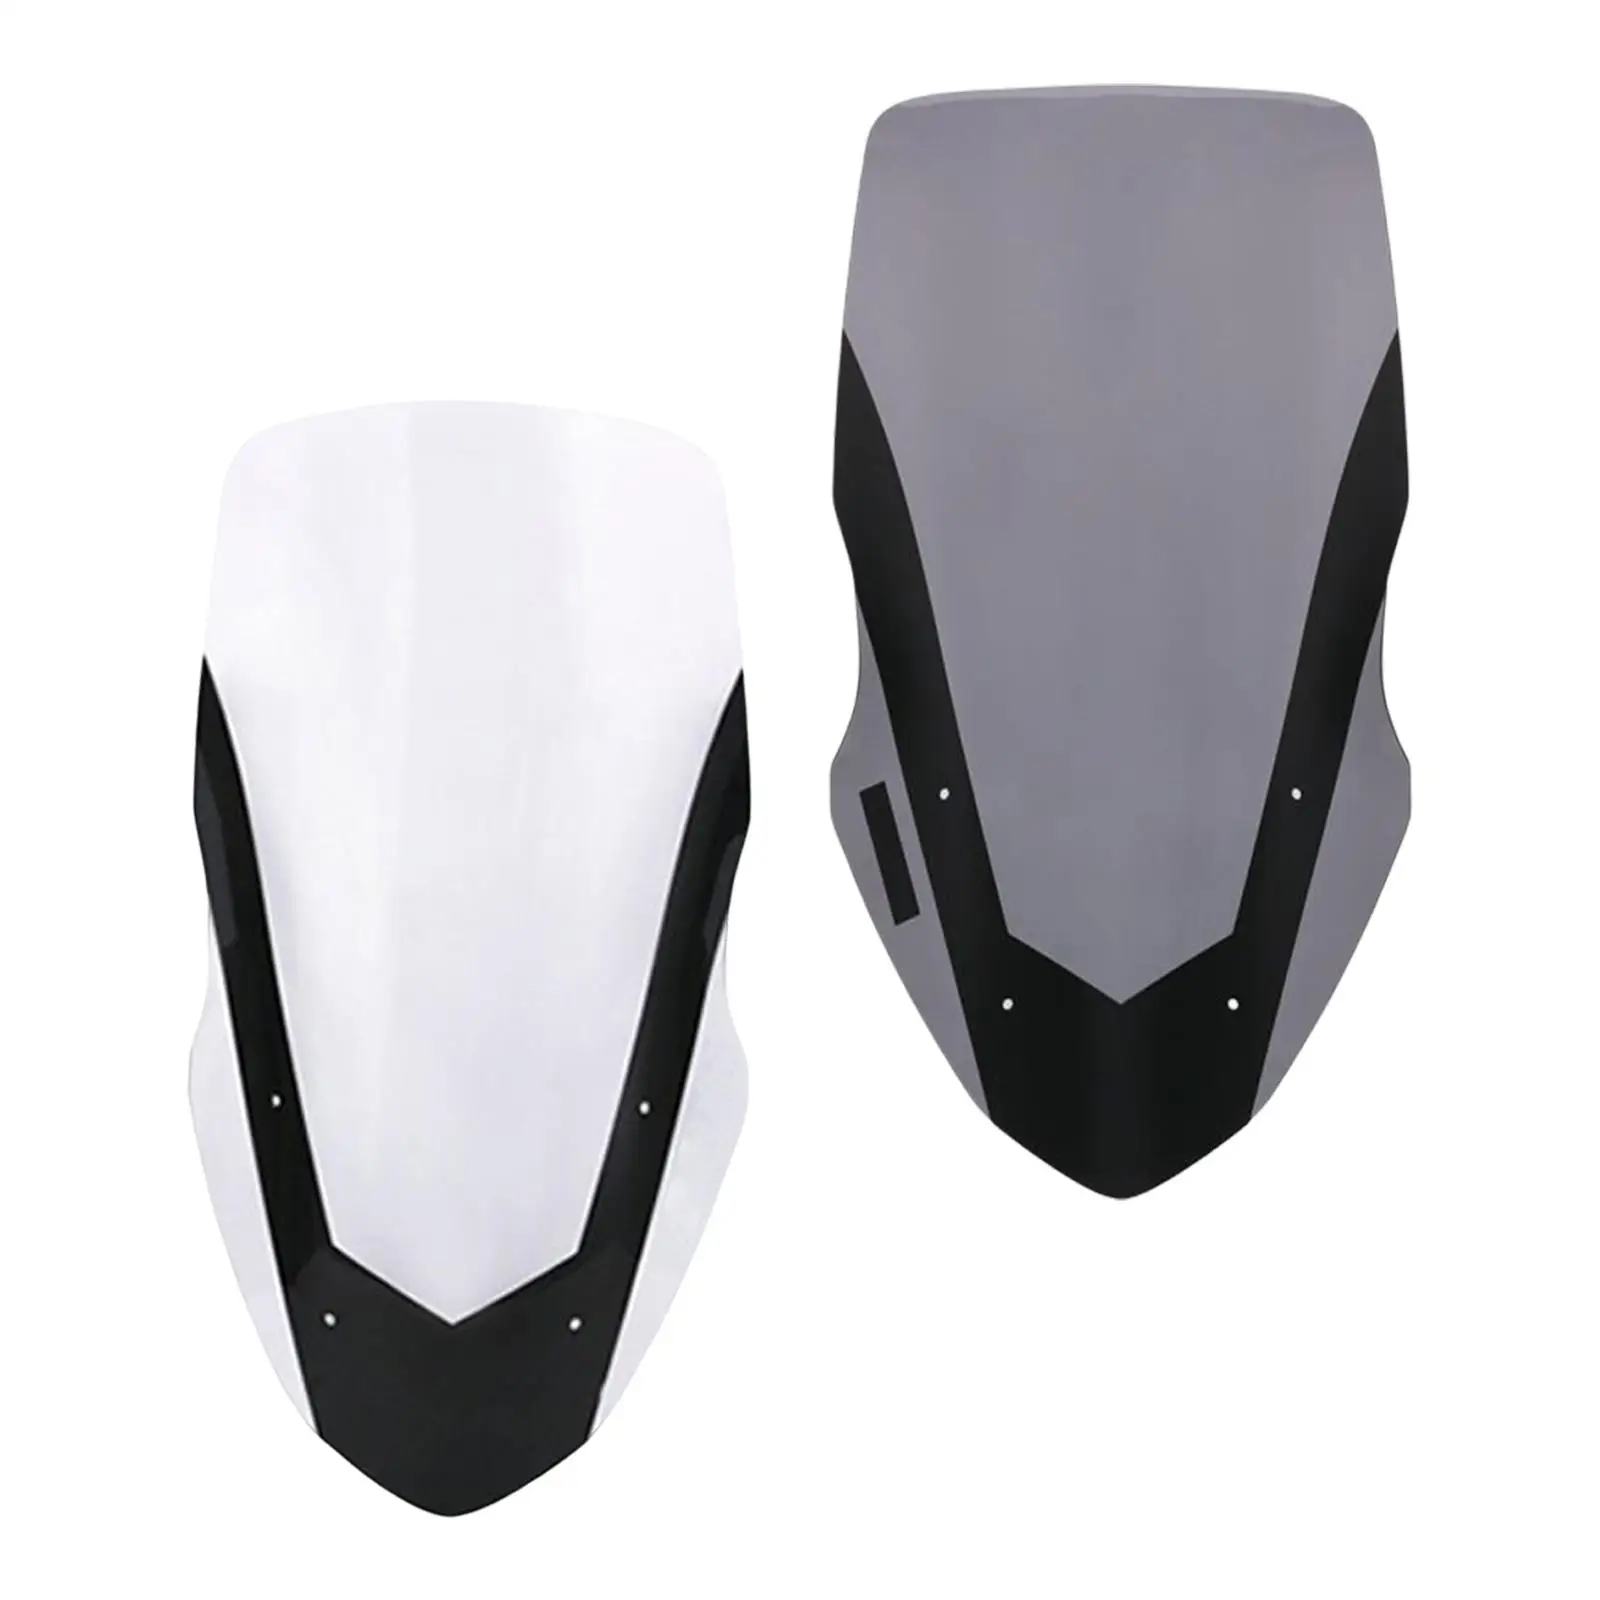 Motorcycle Windshield Wind Screen Deflector Motorbike Windscreen for Yamaha Nmax155 Nmax125 2016-18 Replaces Accessory